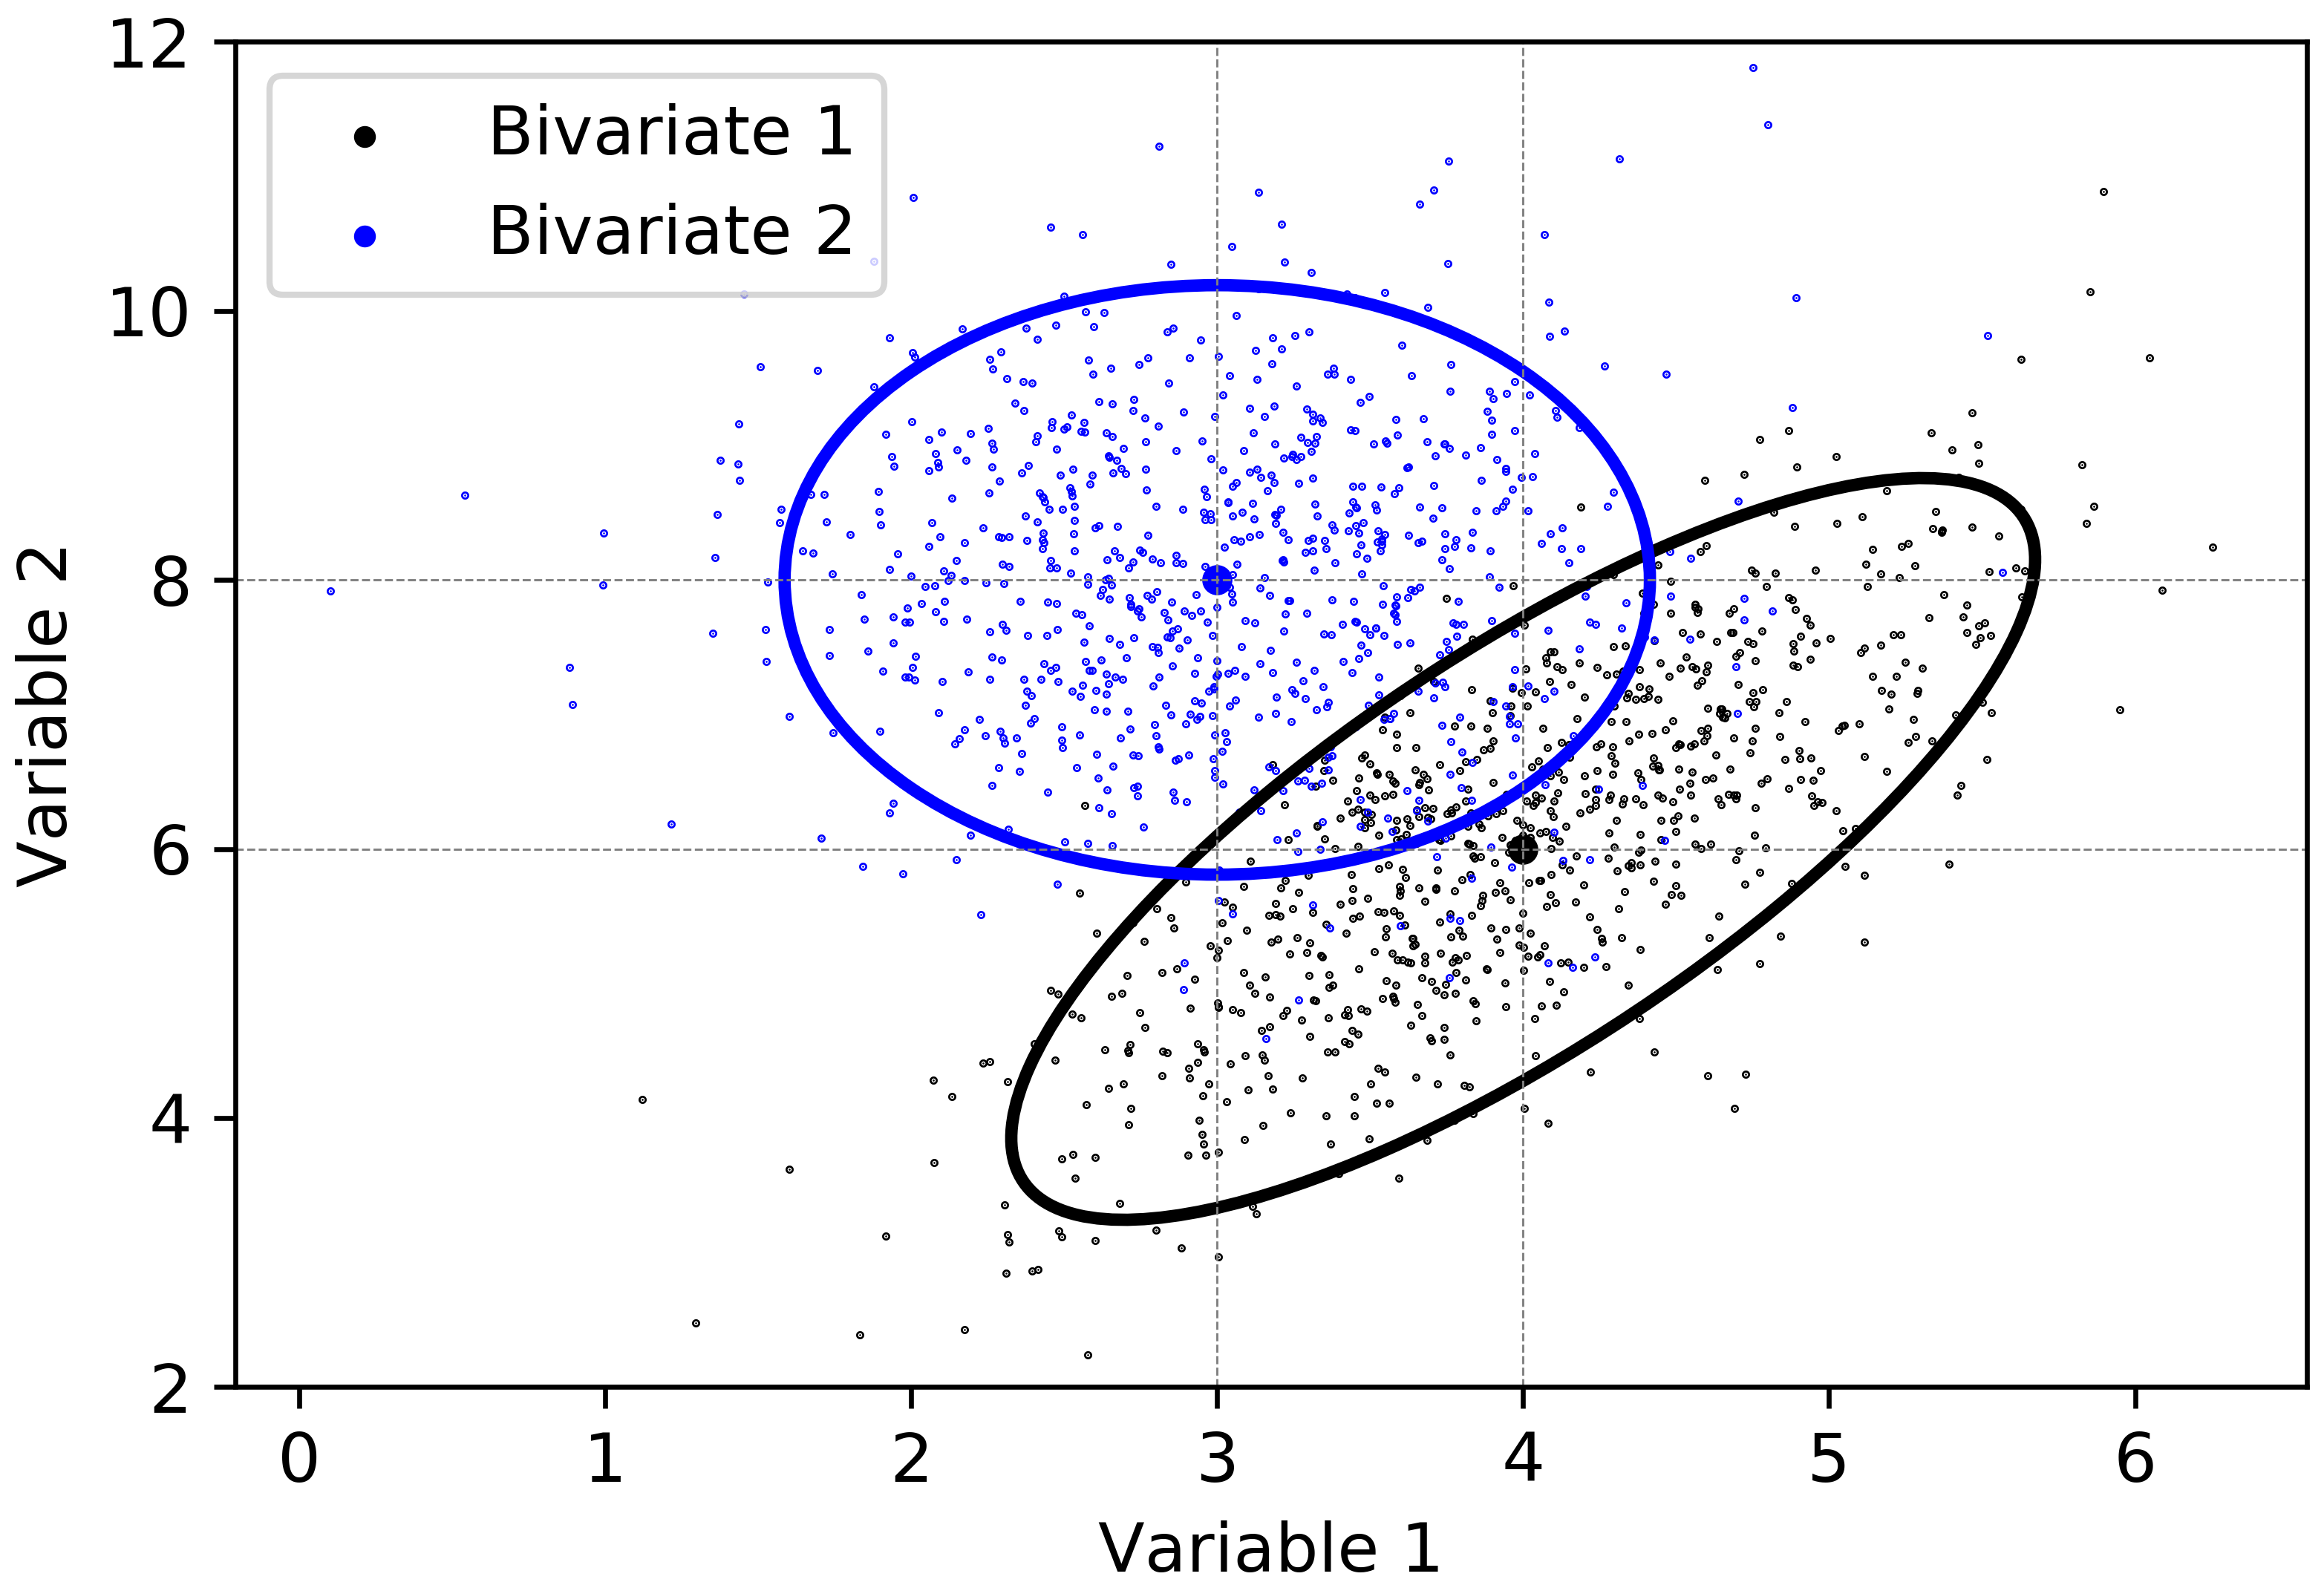 95\% confidence ellipses of the bivariate Gaussian distributions